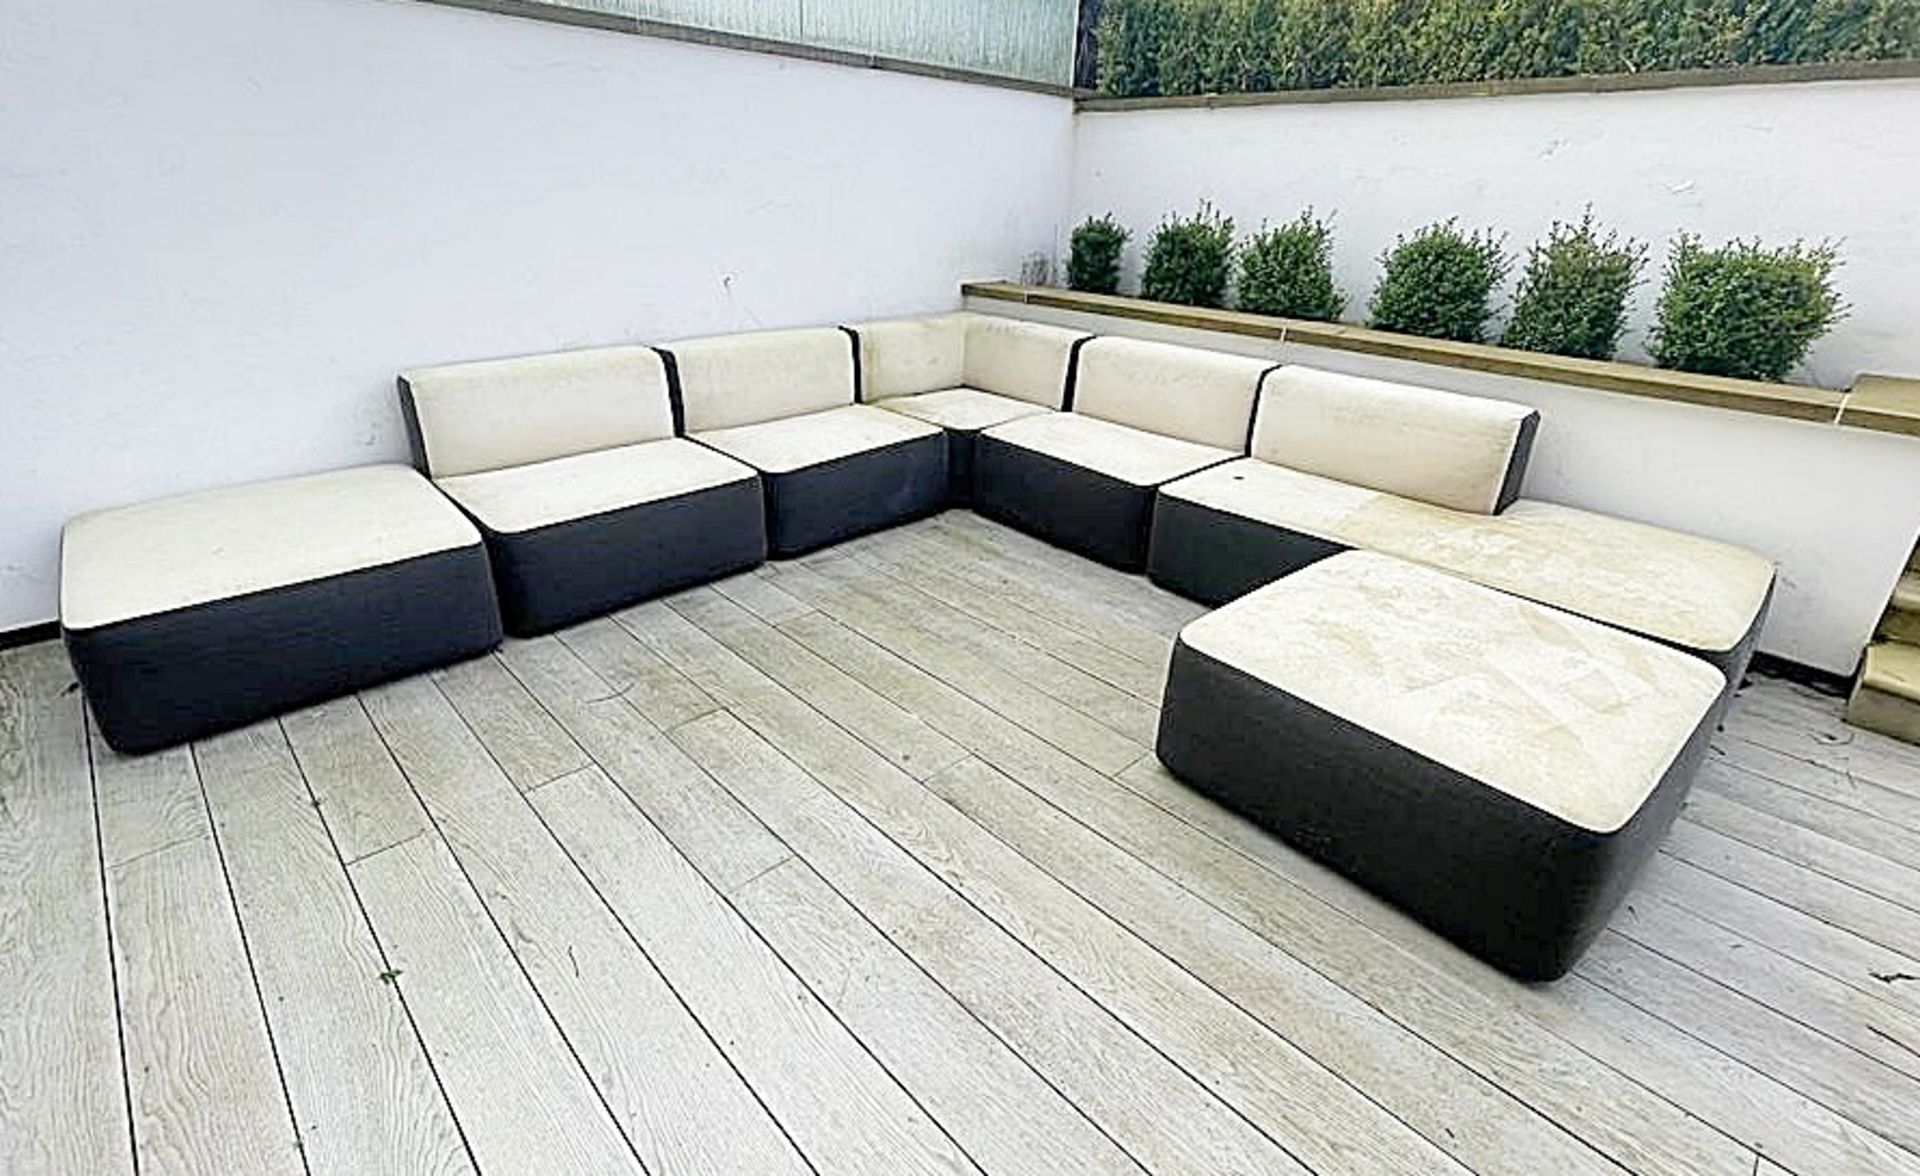 Large 7-Section VARASCHIN Modular Outdoor Corner Sofa Seating - Dimensions To Follow - From an